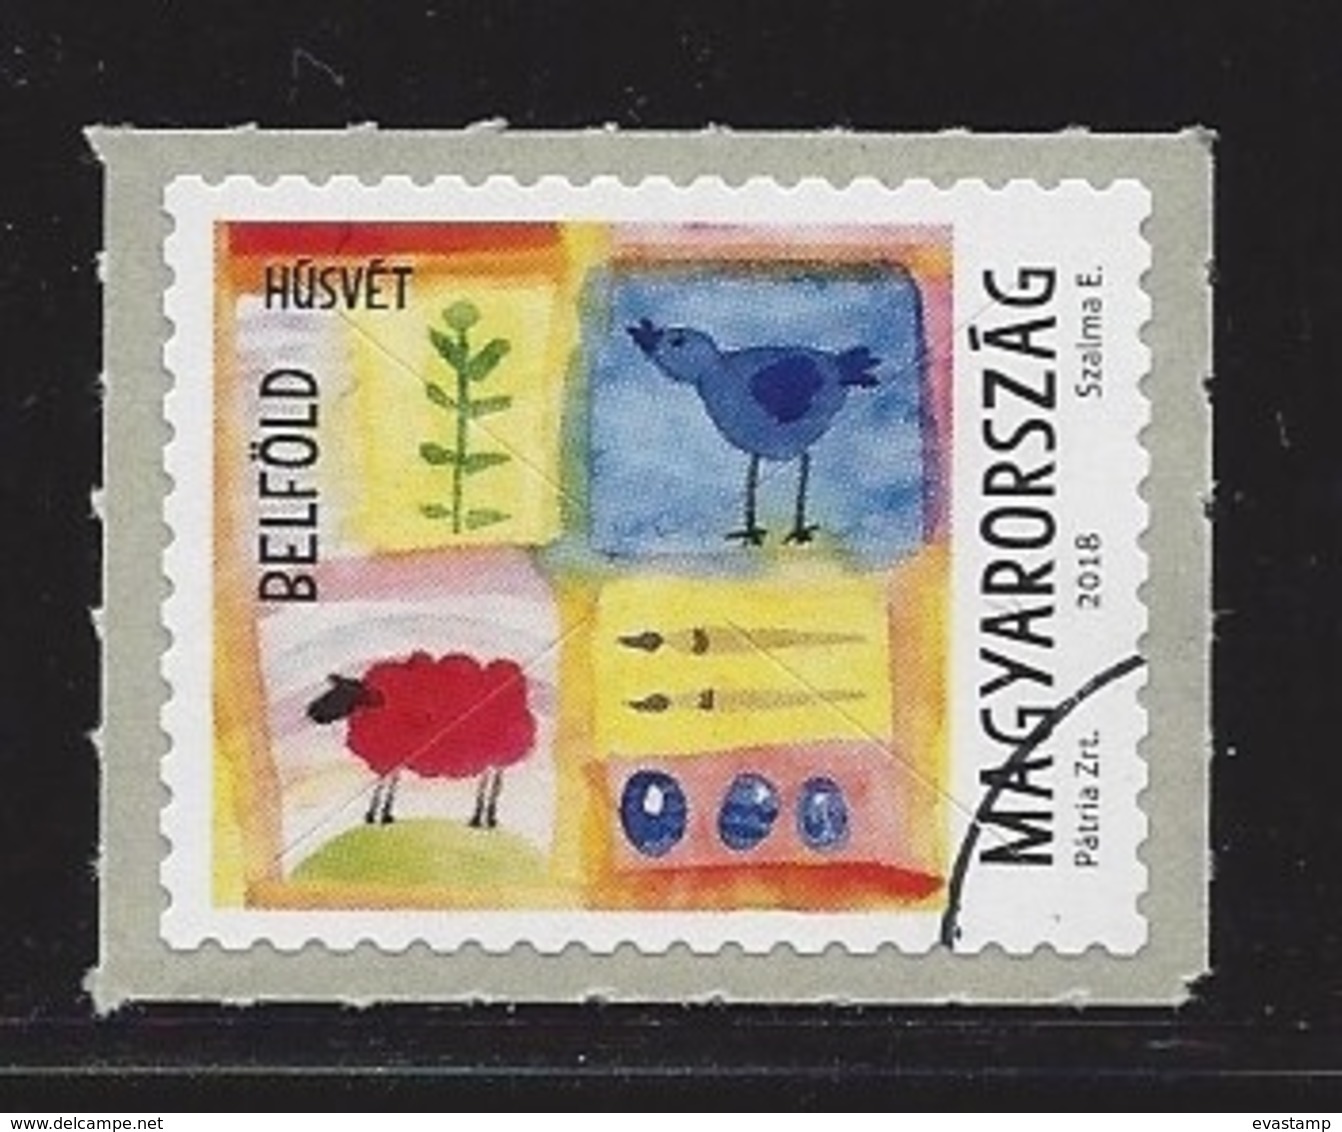 HUNGARY - 2018. Easter / Eggs / Self Adhesive Stamp / Domestic Nominal Value USED!!! - Oblitérés